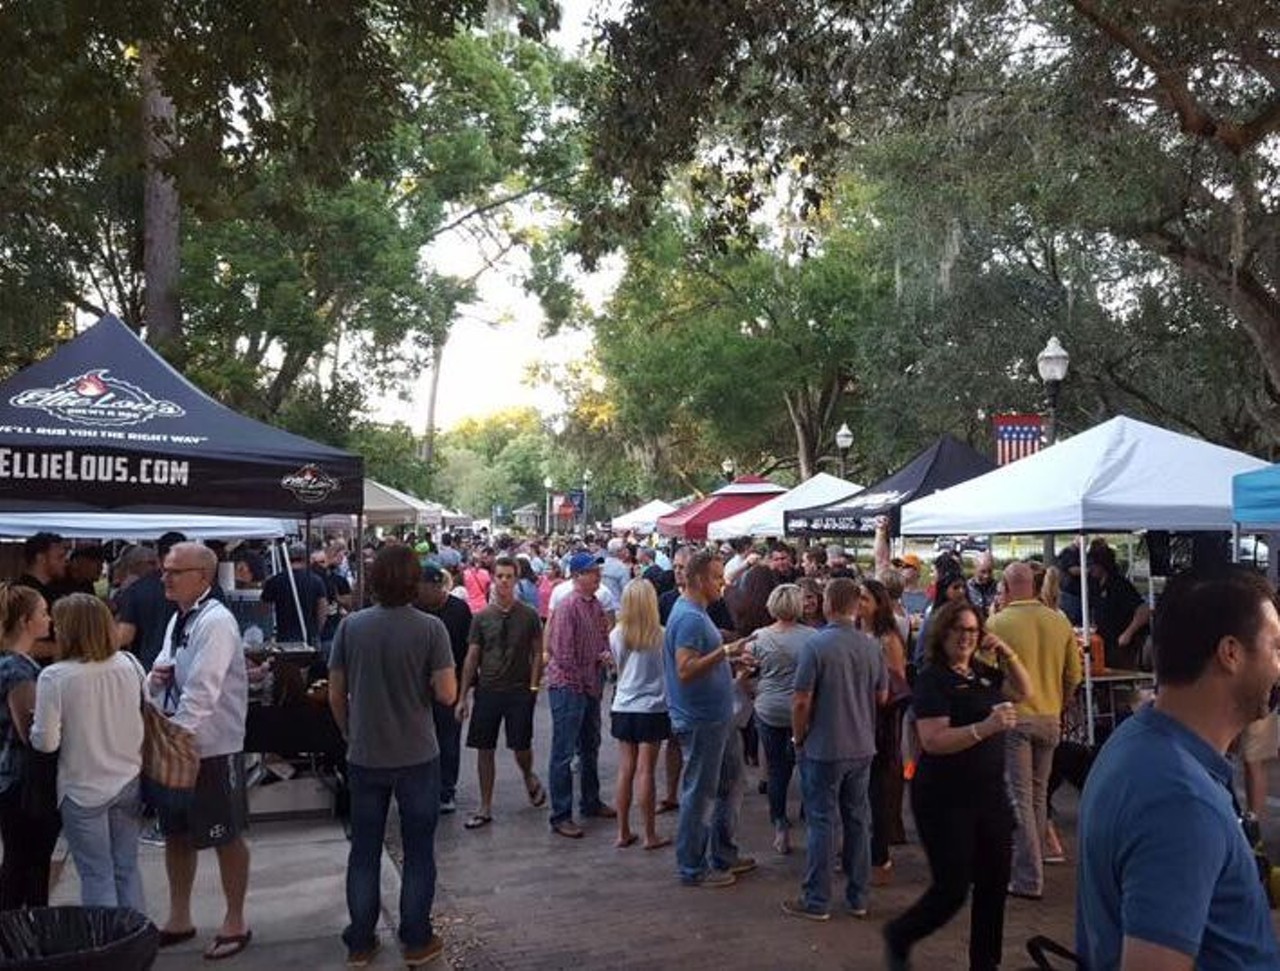 Saturday, Oct. 21 
Windermere Craft Beer Fest
Unlimited tastings of local craft beers, food vendors and live music.
4-8 pm; Windermere Town Hall, 520 Main St., Windermere; $25-$45; (407) 574-1002 windermerecraftbeerfest.com
Photo via josieline_/Instagram